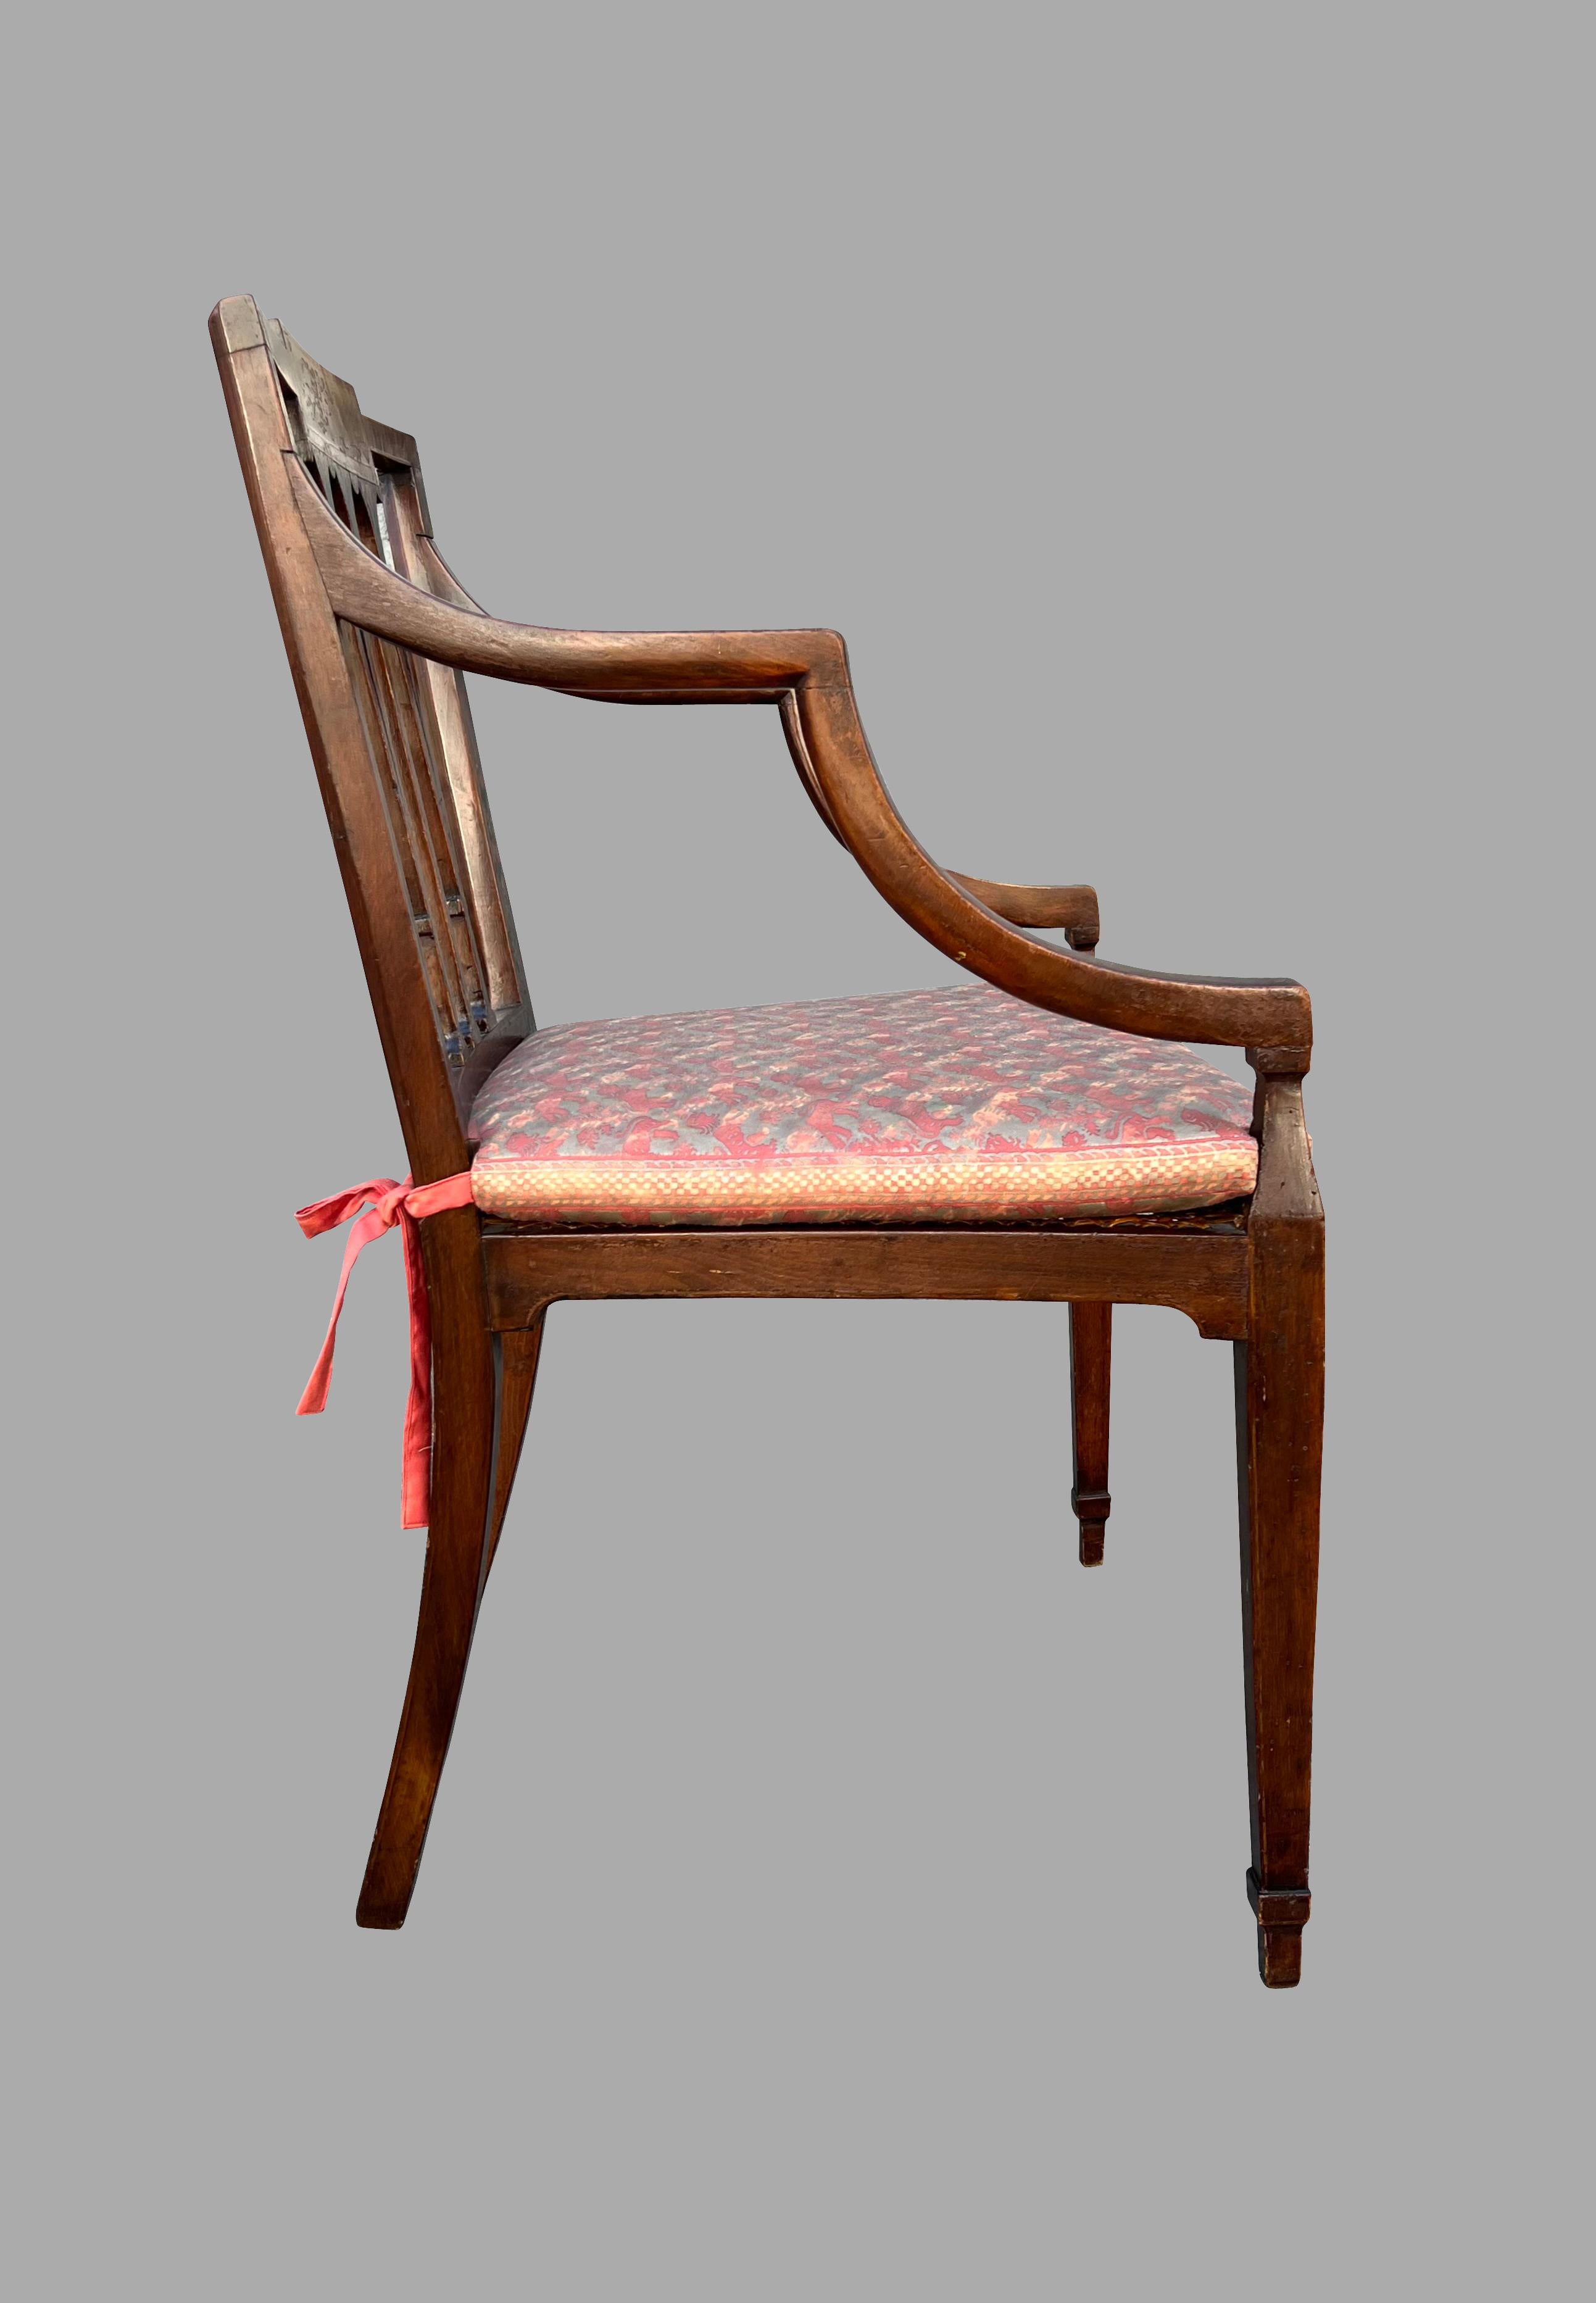 Adam Style Painted Satinwood Armchair with Floral Decoration and Caned Seat In Good Condition For Sale In San Francisco, CA